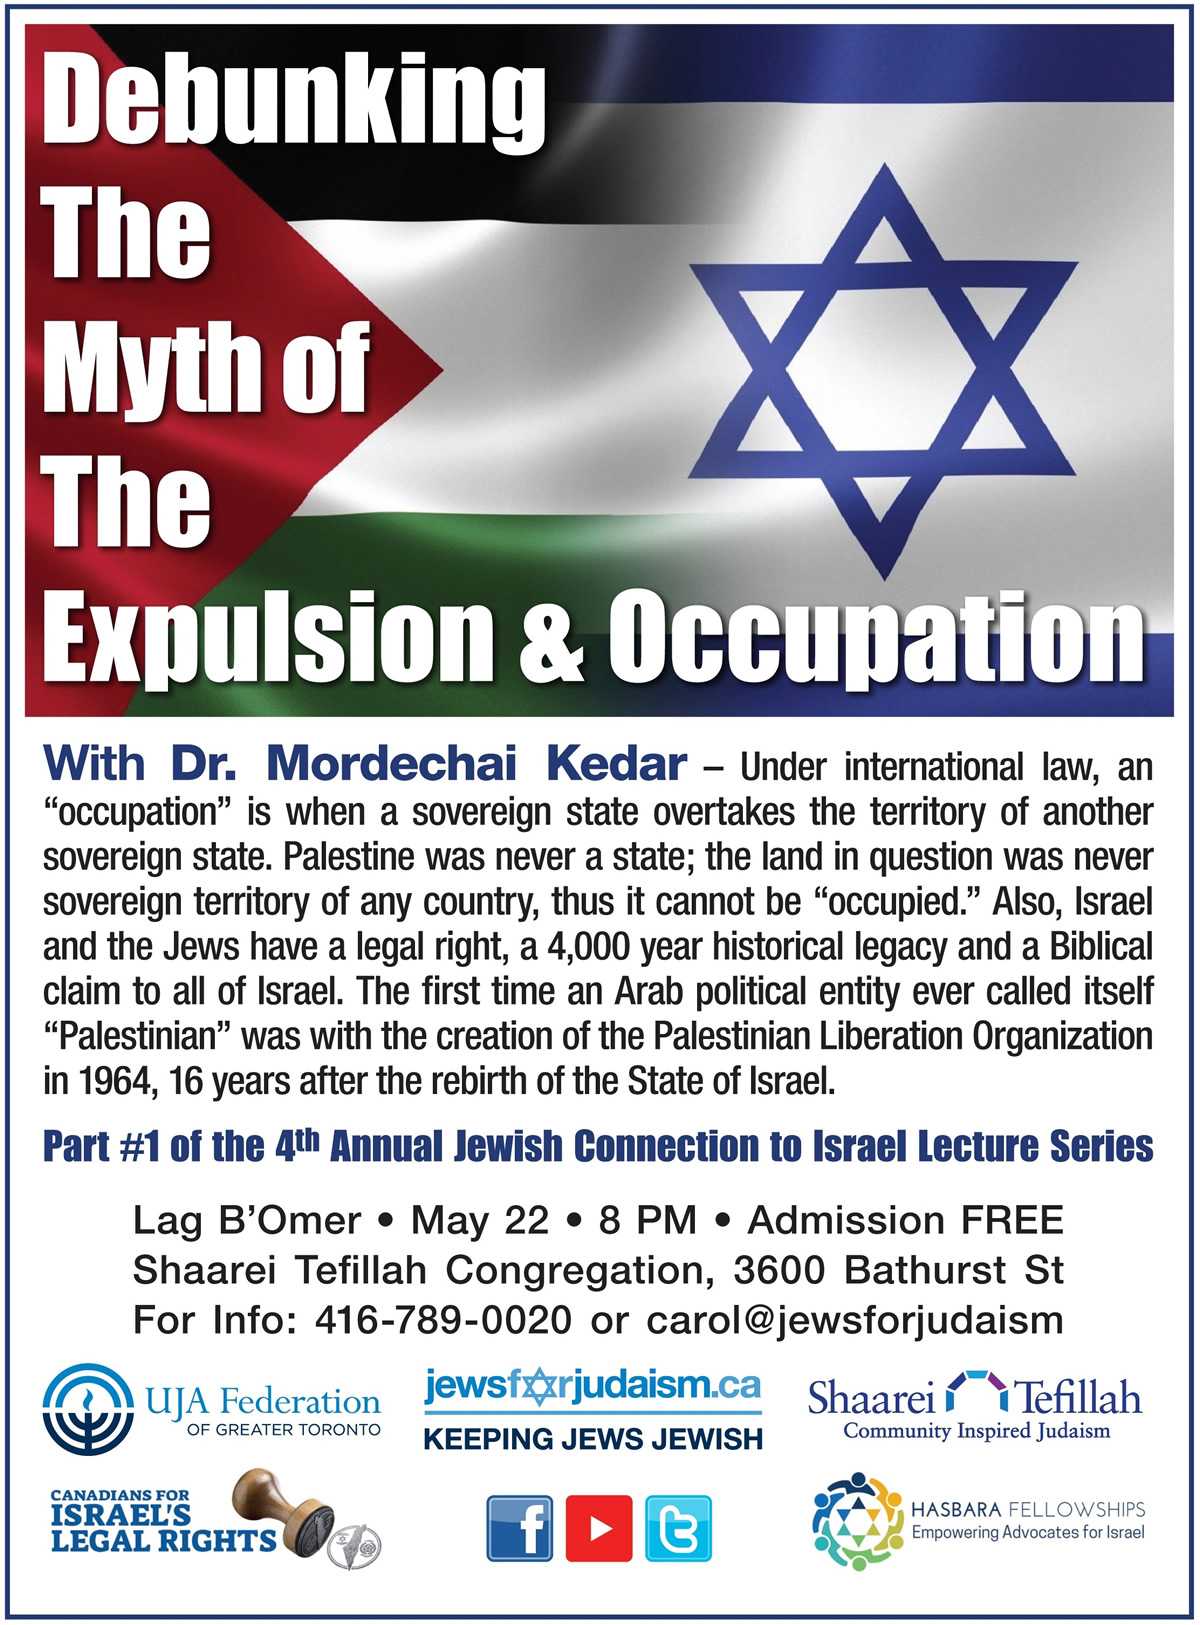 DEBUNKING THE MYTH OF THE OCCUPATION with Dr. Mordechai Kedar